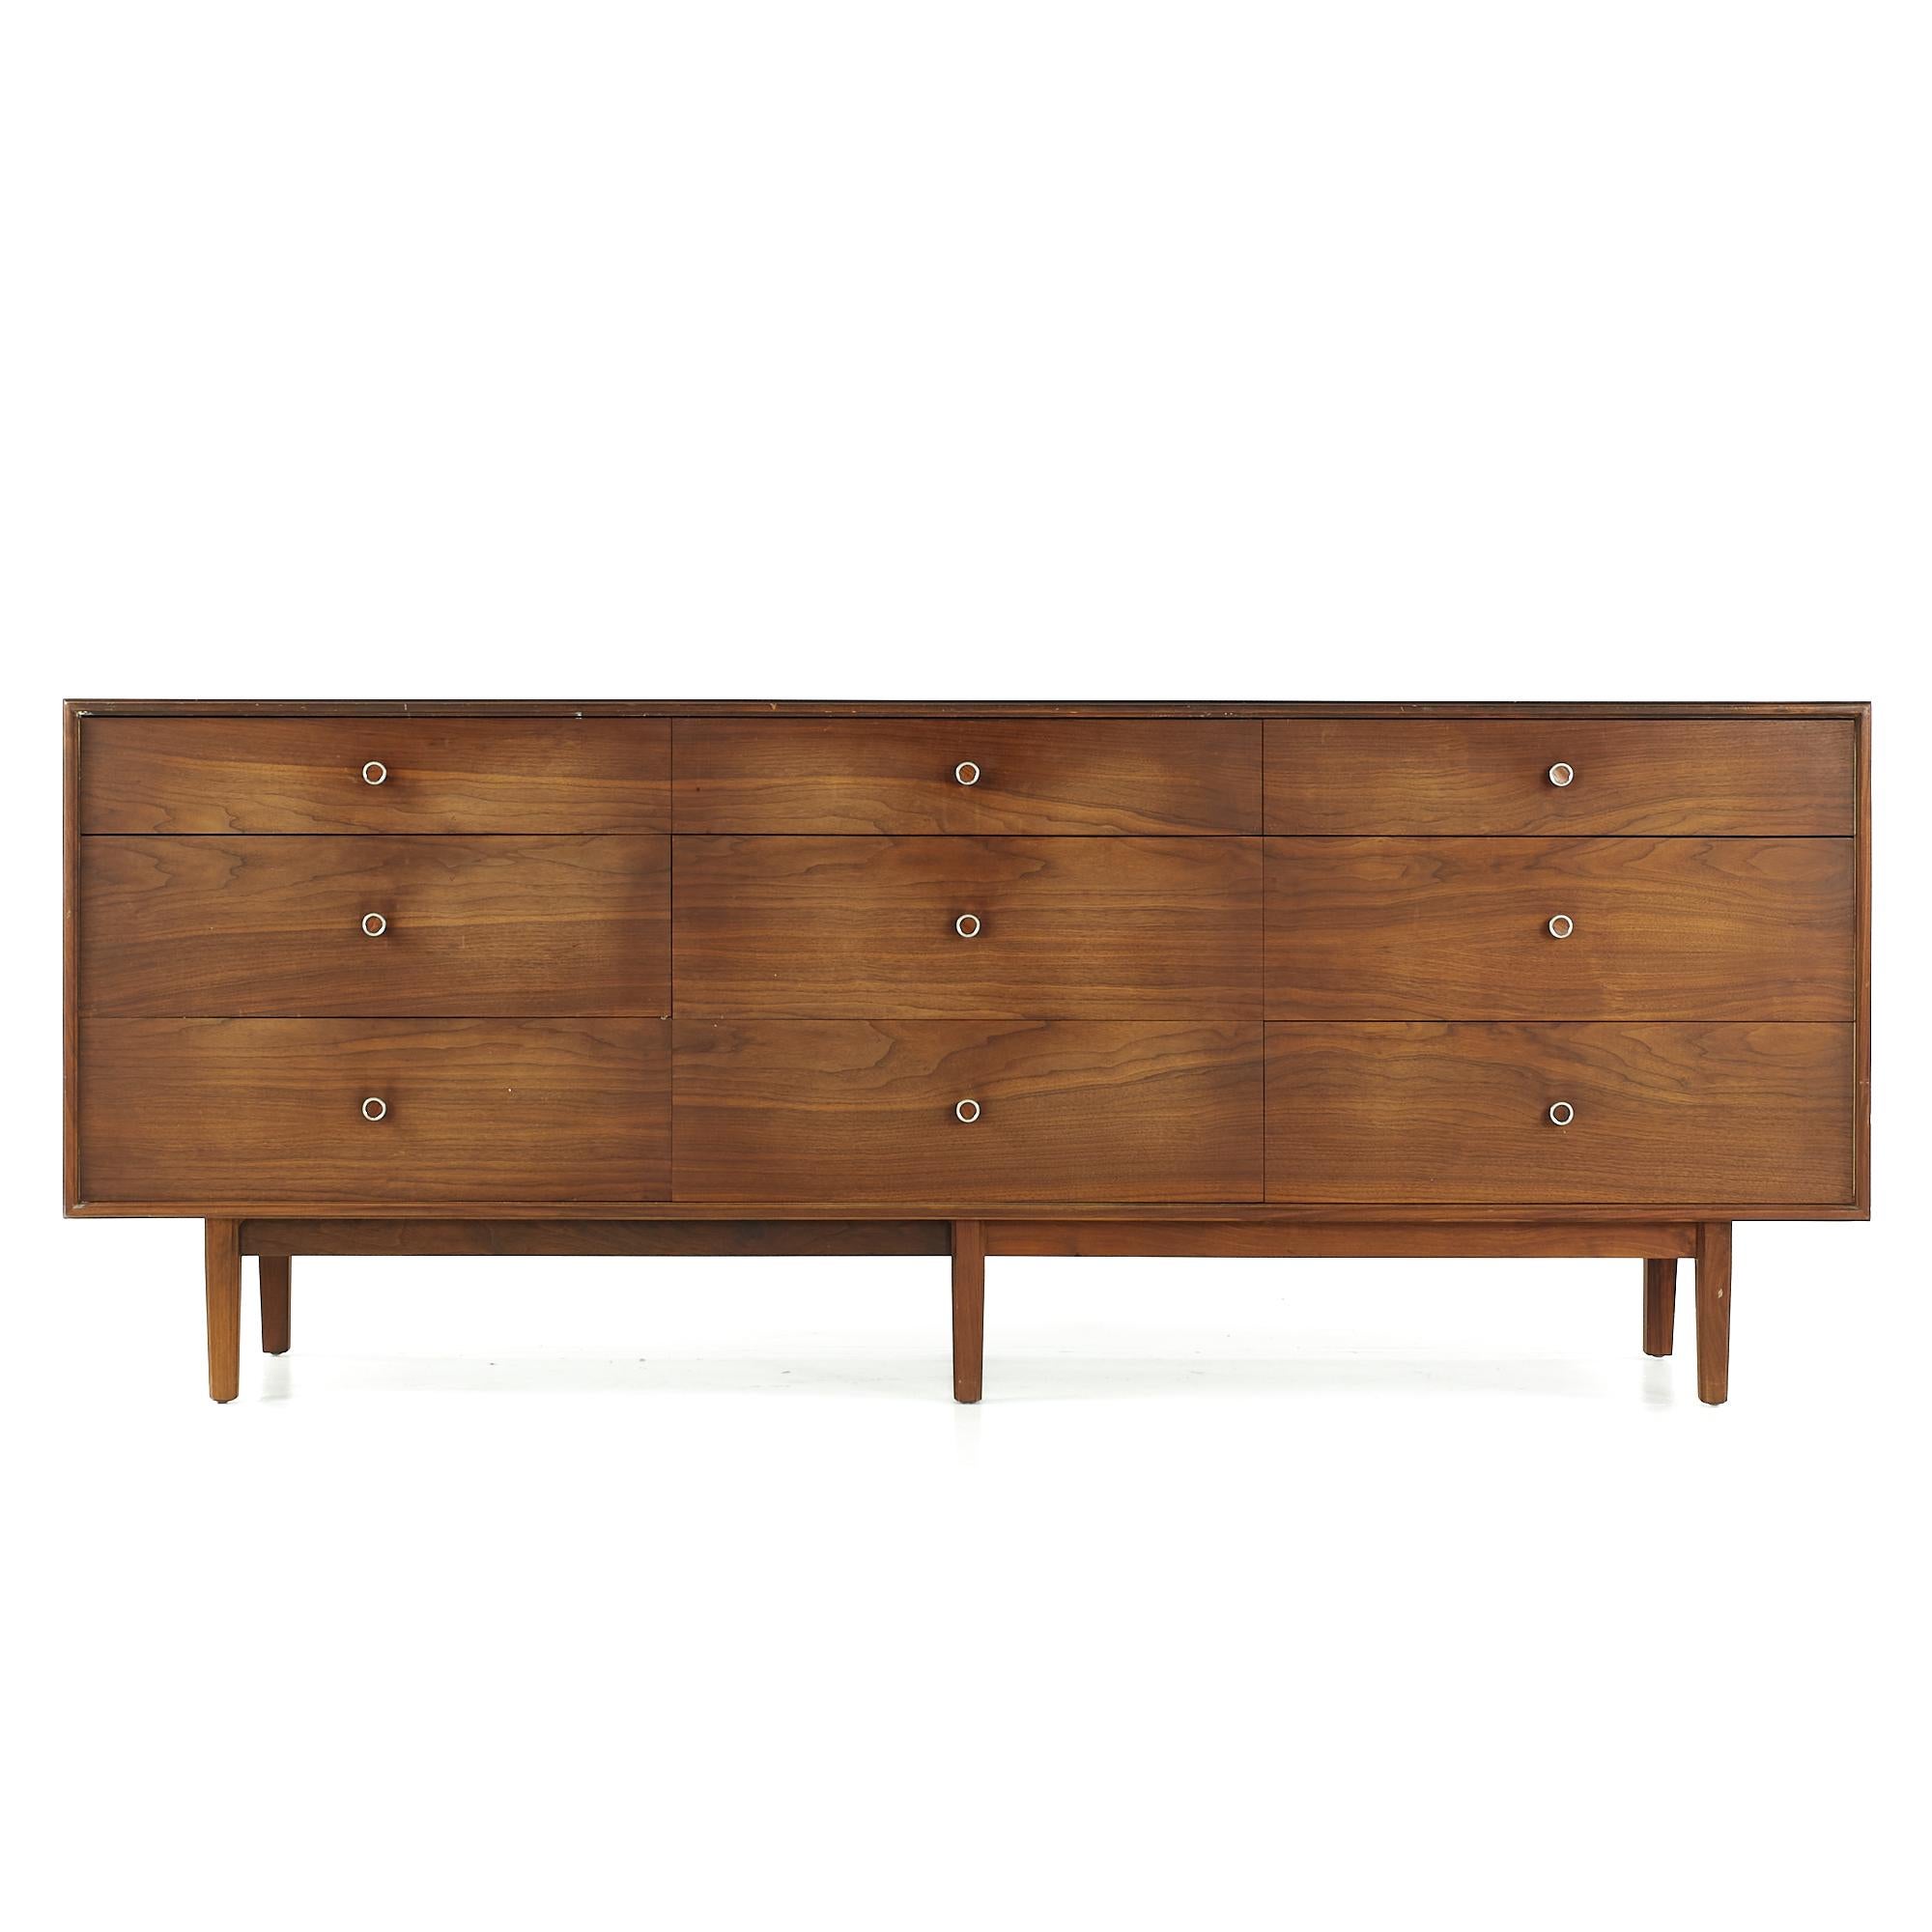 Robert Baron for Glenn of California midcentury walnut lowboy dresser.

This lowboy measures: 78 wide x 18 deep x 30.5 inches high

All pieces of furniture can be had in what we call restored vintage condition. That means the piece is restored